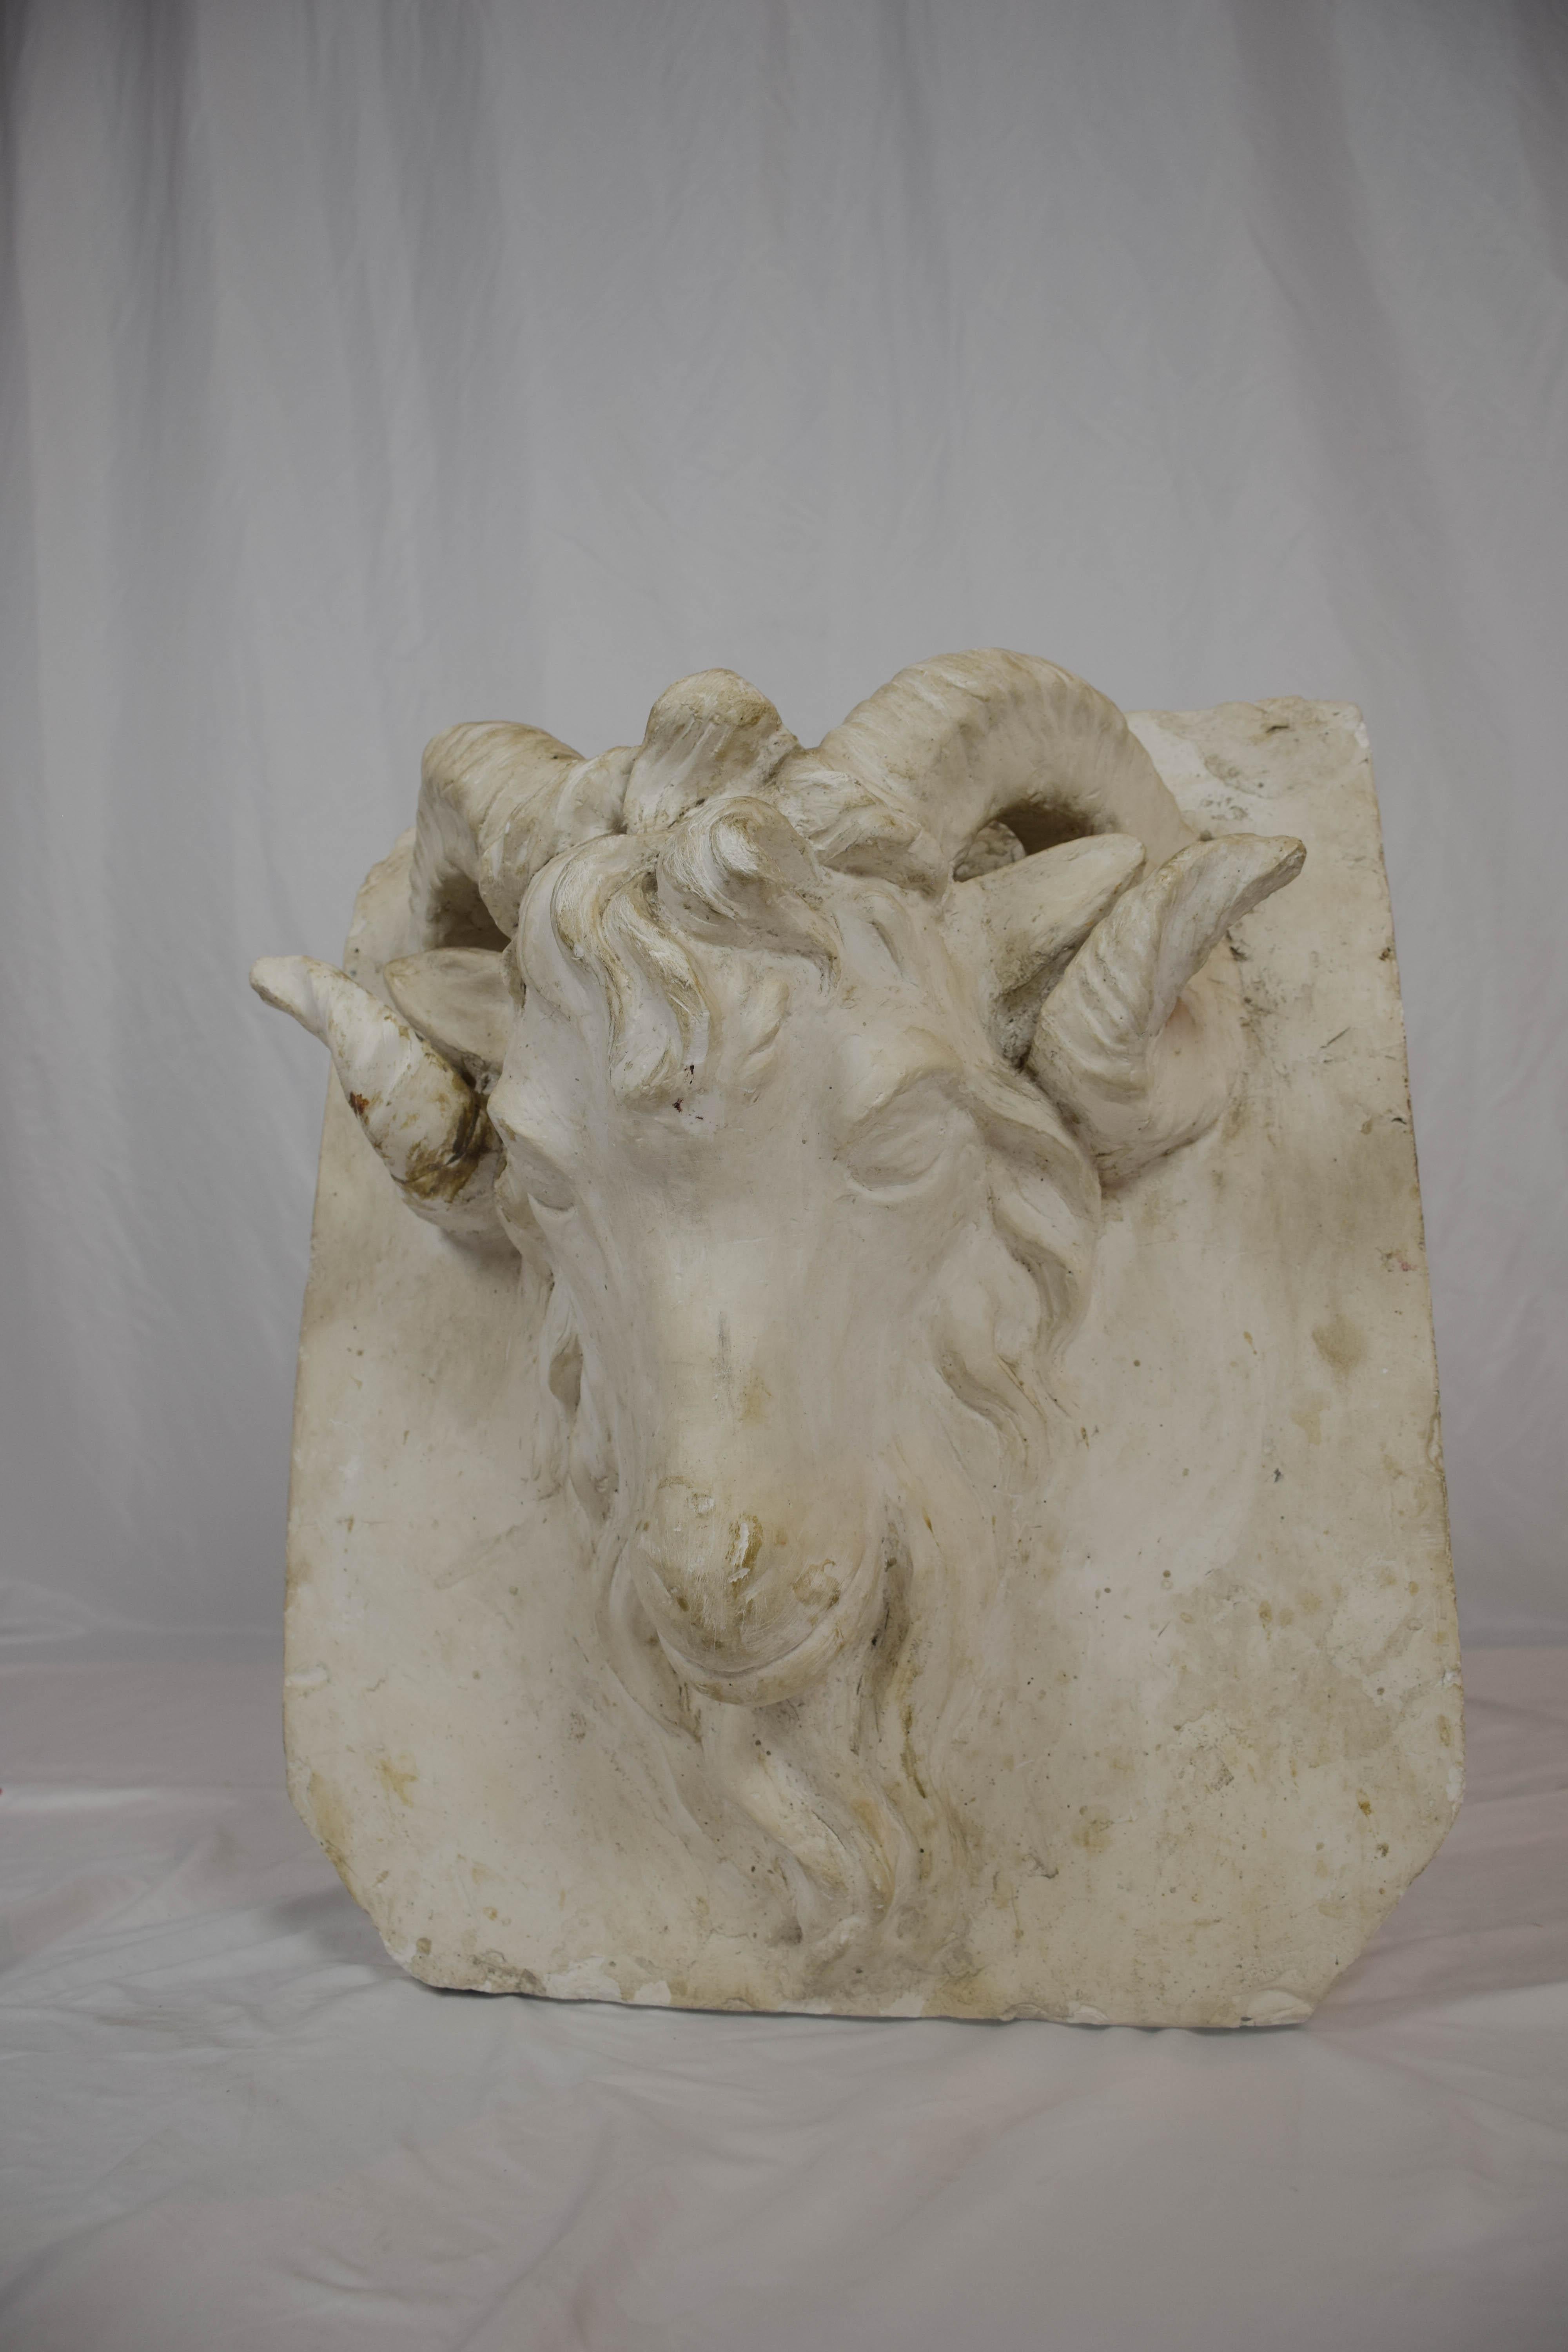 This wonderful plaster ram head figure was found in Southern France. The piece has incredible intricate detailing and is complete with unbroken horns and ears on either side of the rams face. The ram has been a long held symbol for determination,